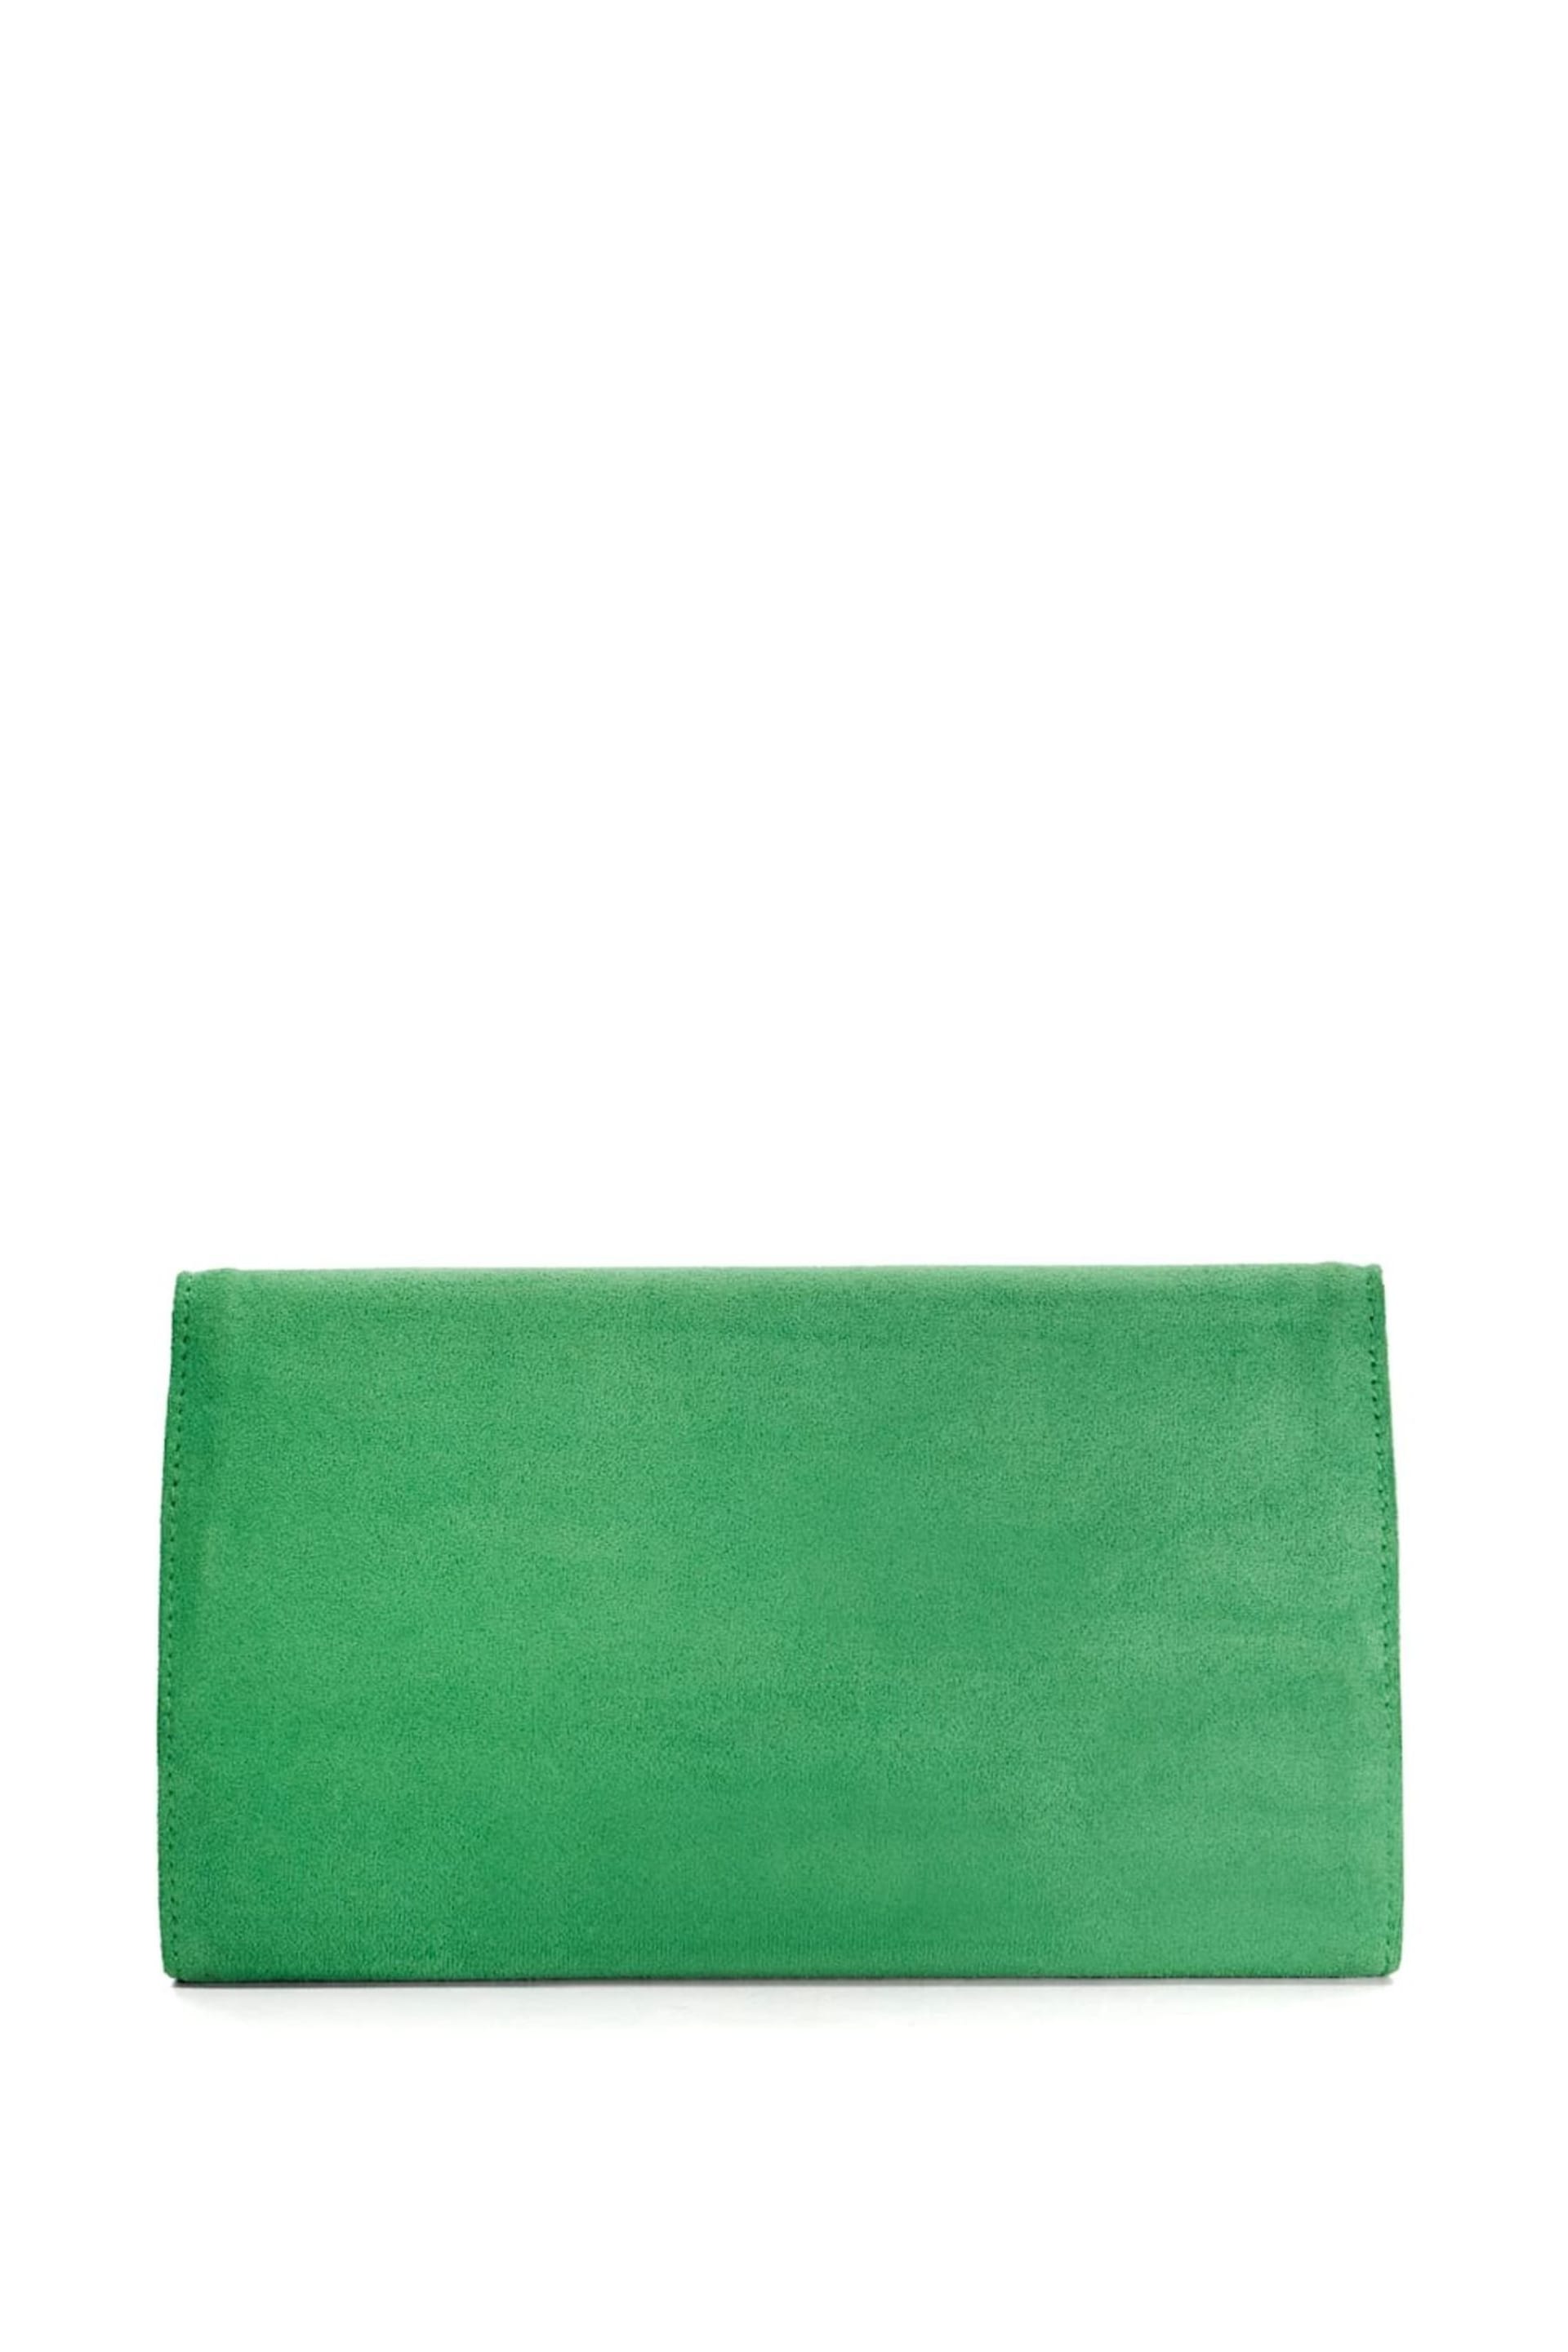 Dune London Green Ballads Structured Foldover Clutch Bag - Image 4 of 6